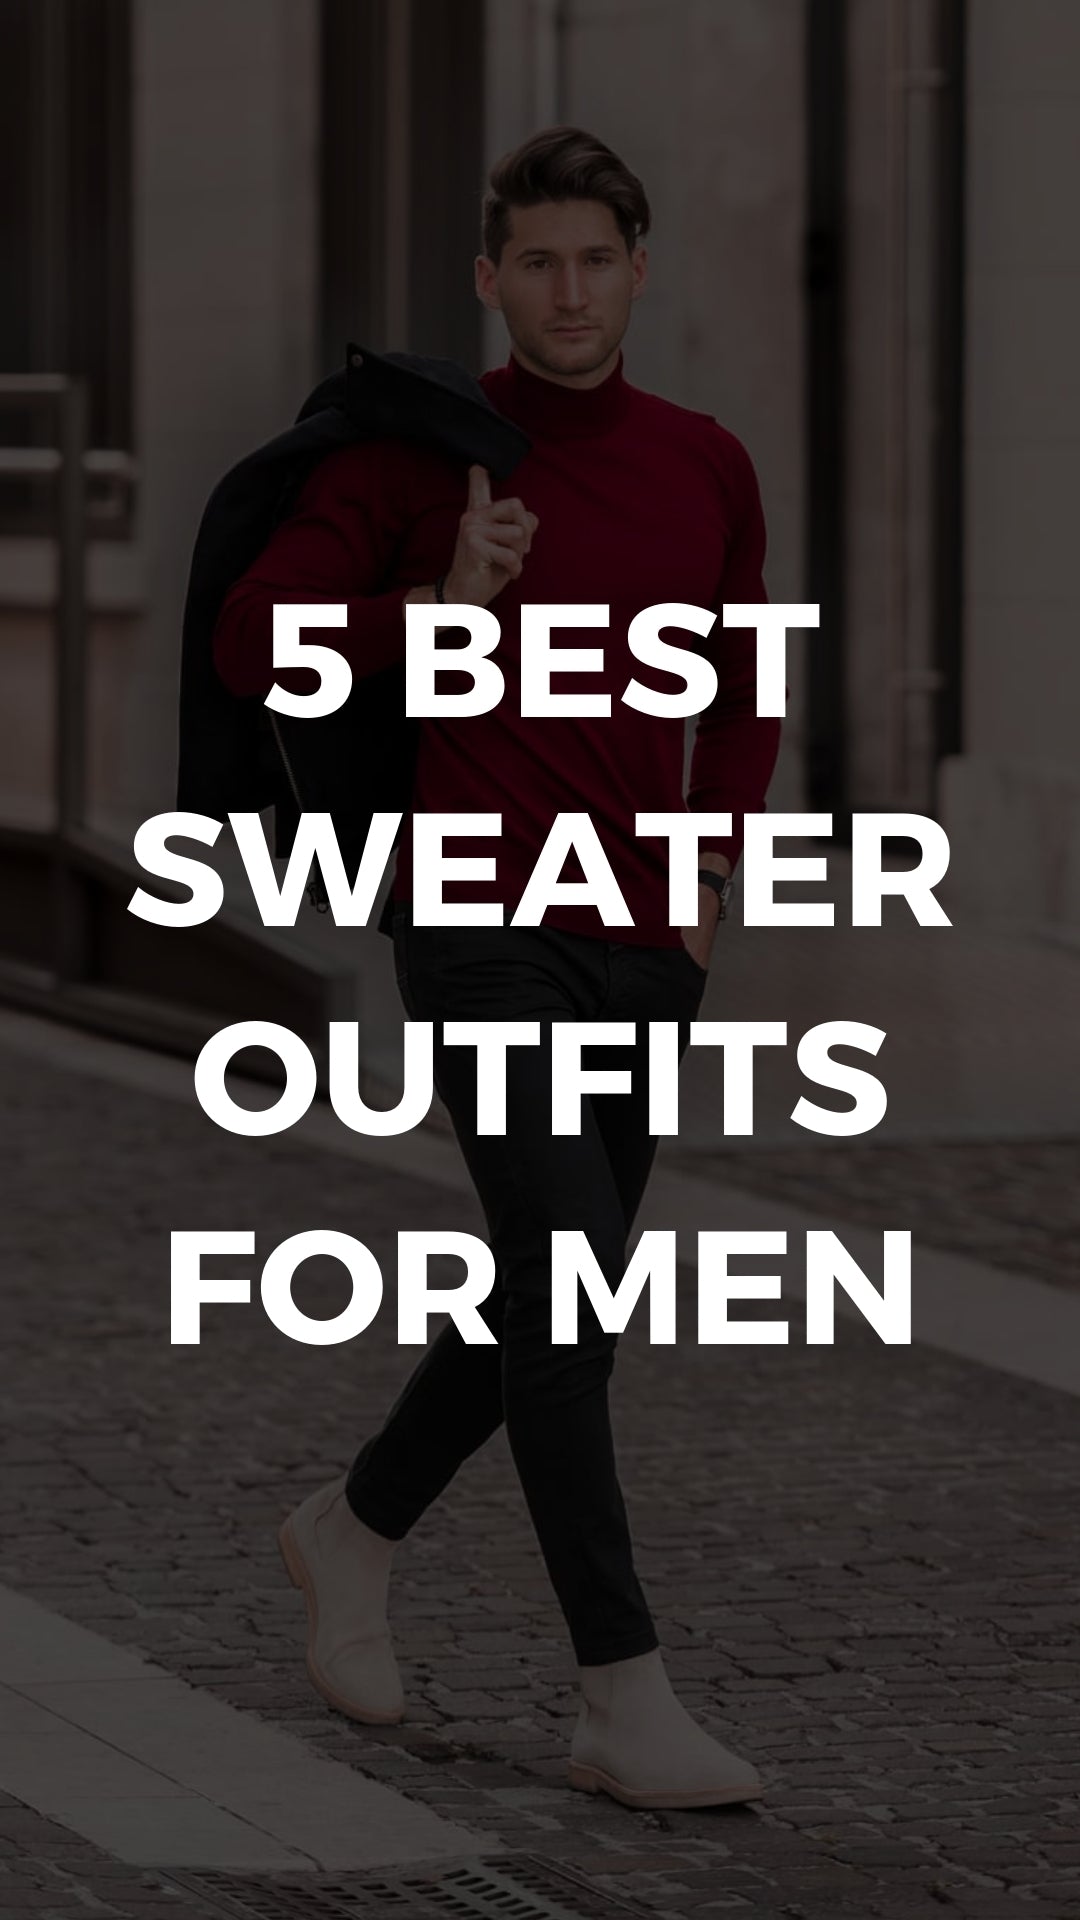 Found: The Best Sweater Outfits For Men #sweater #outfits #mensfashion ...